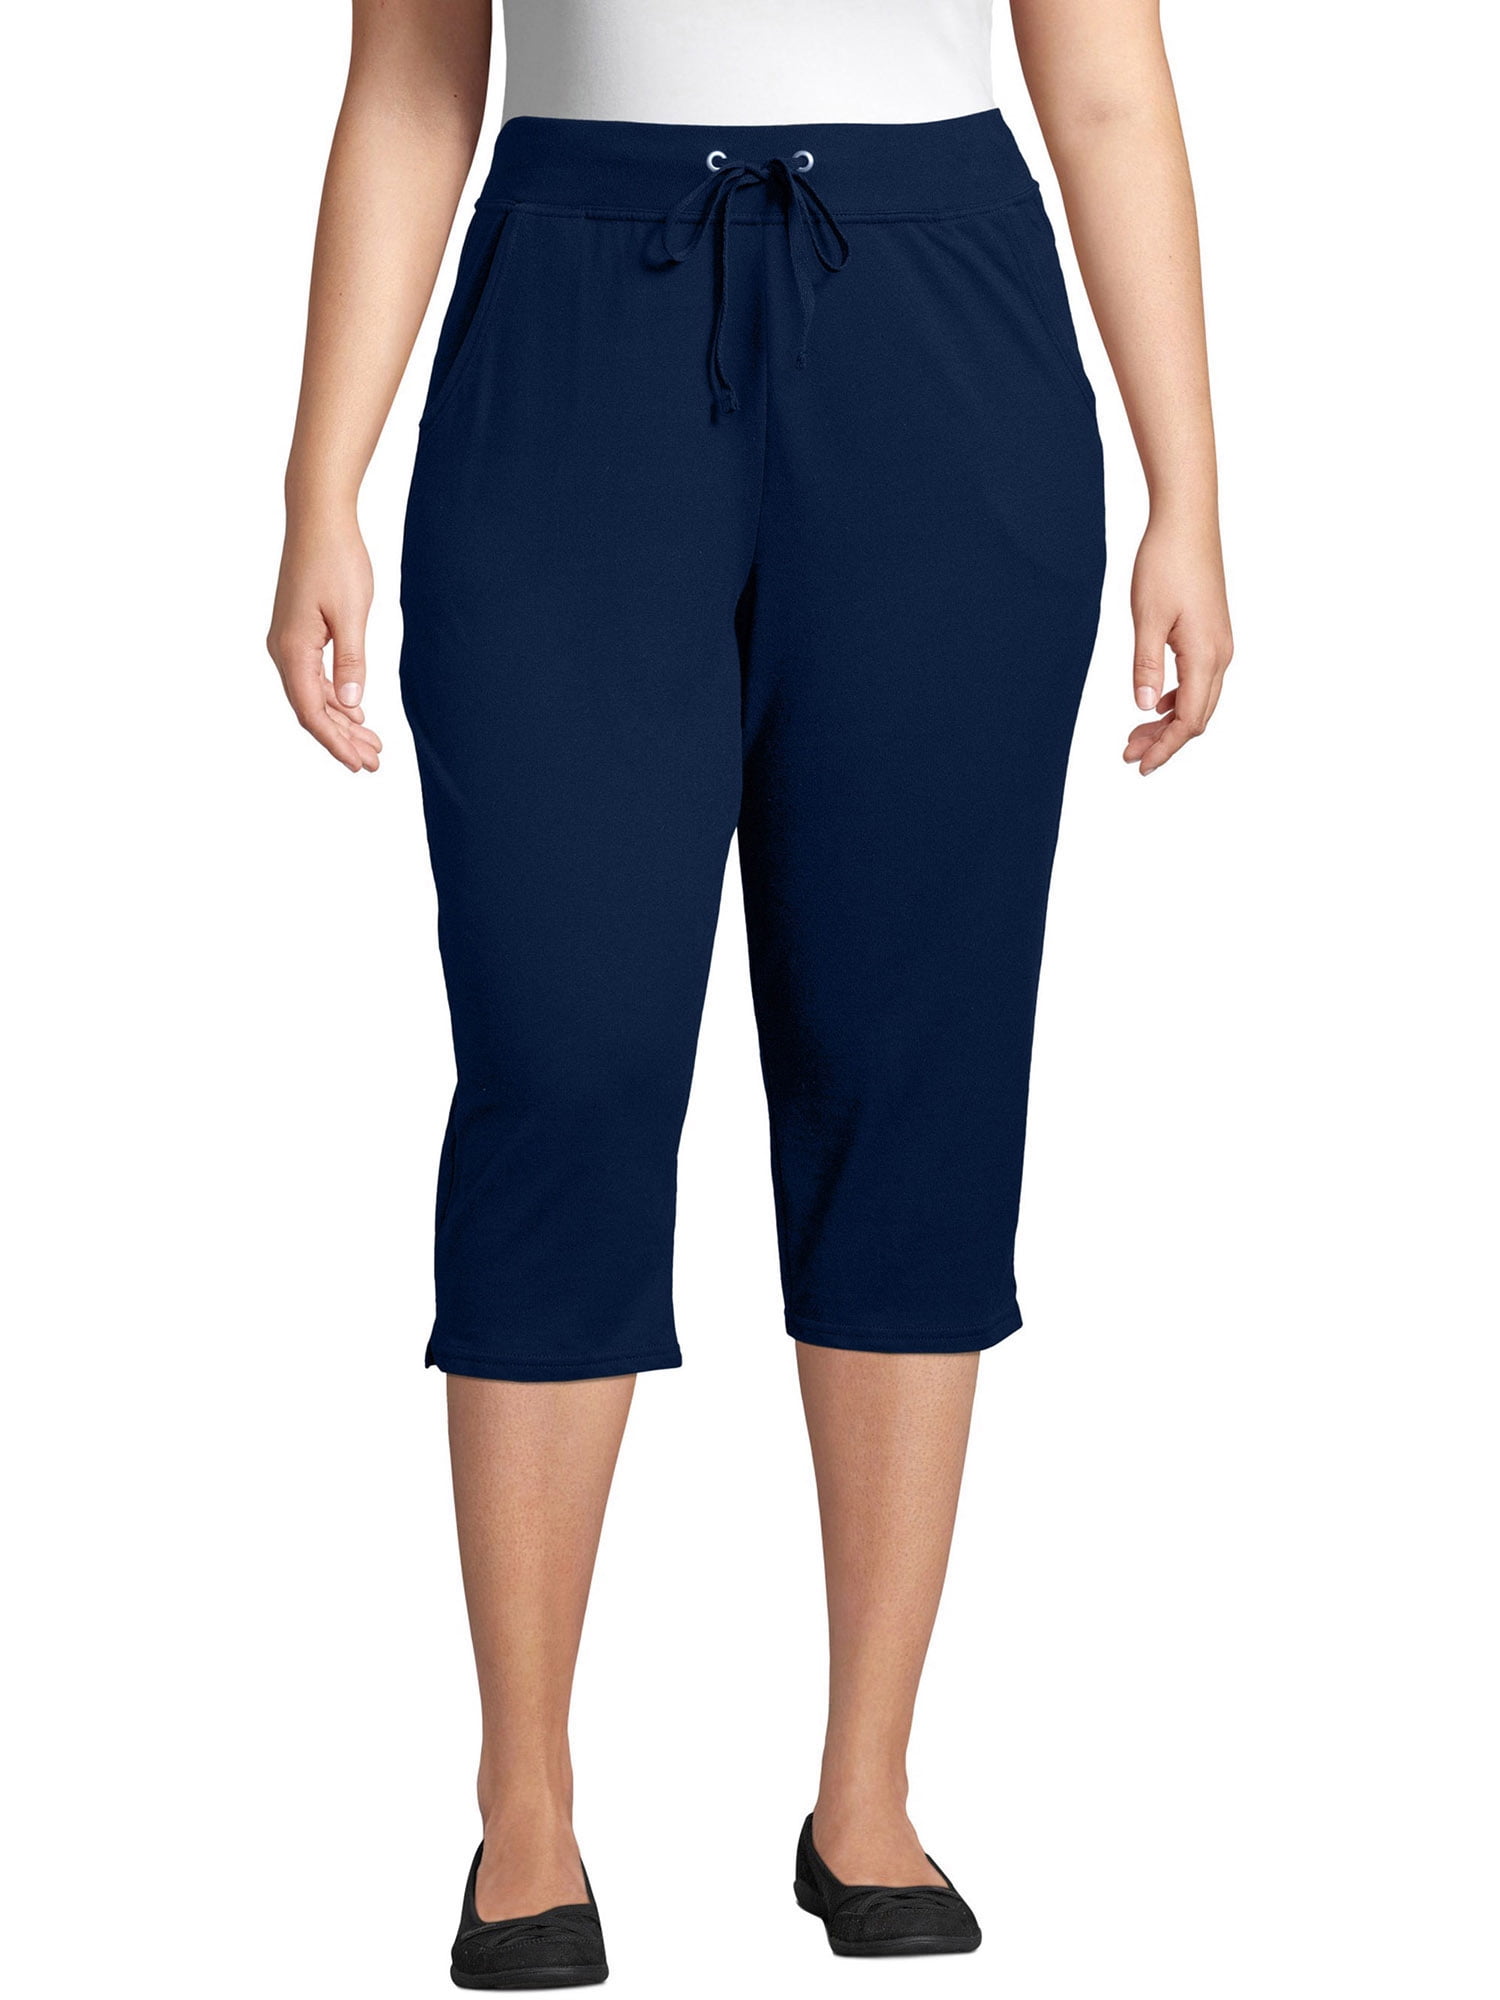 Hanes Just My Size Women's French Terry Capris, 19 (Plus Size)